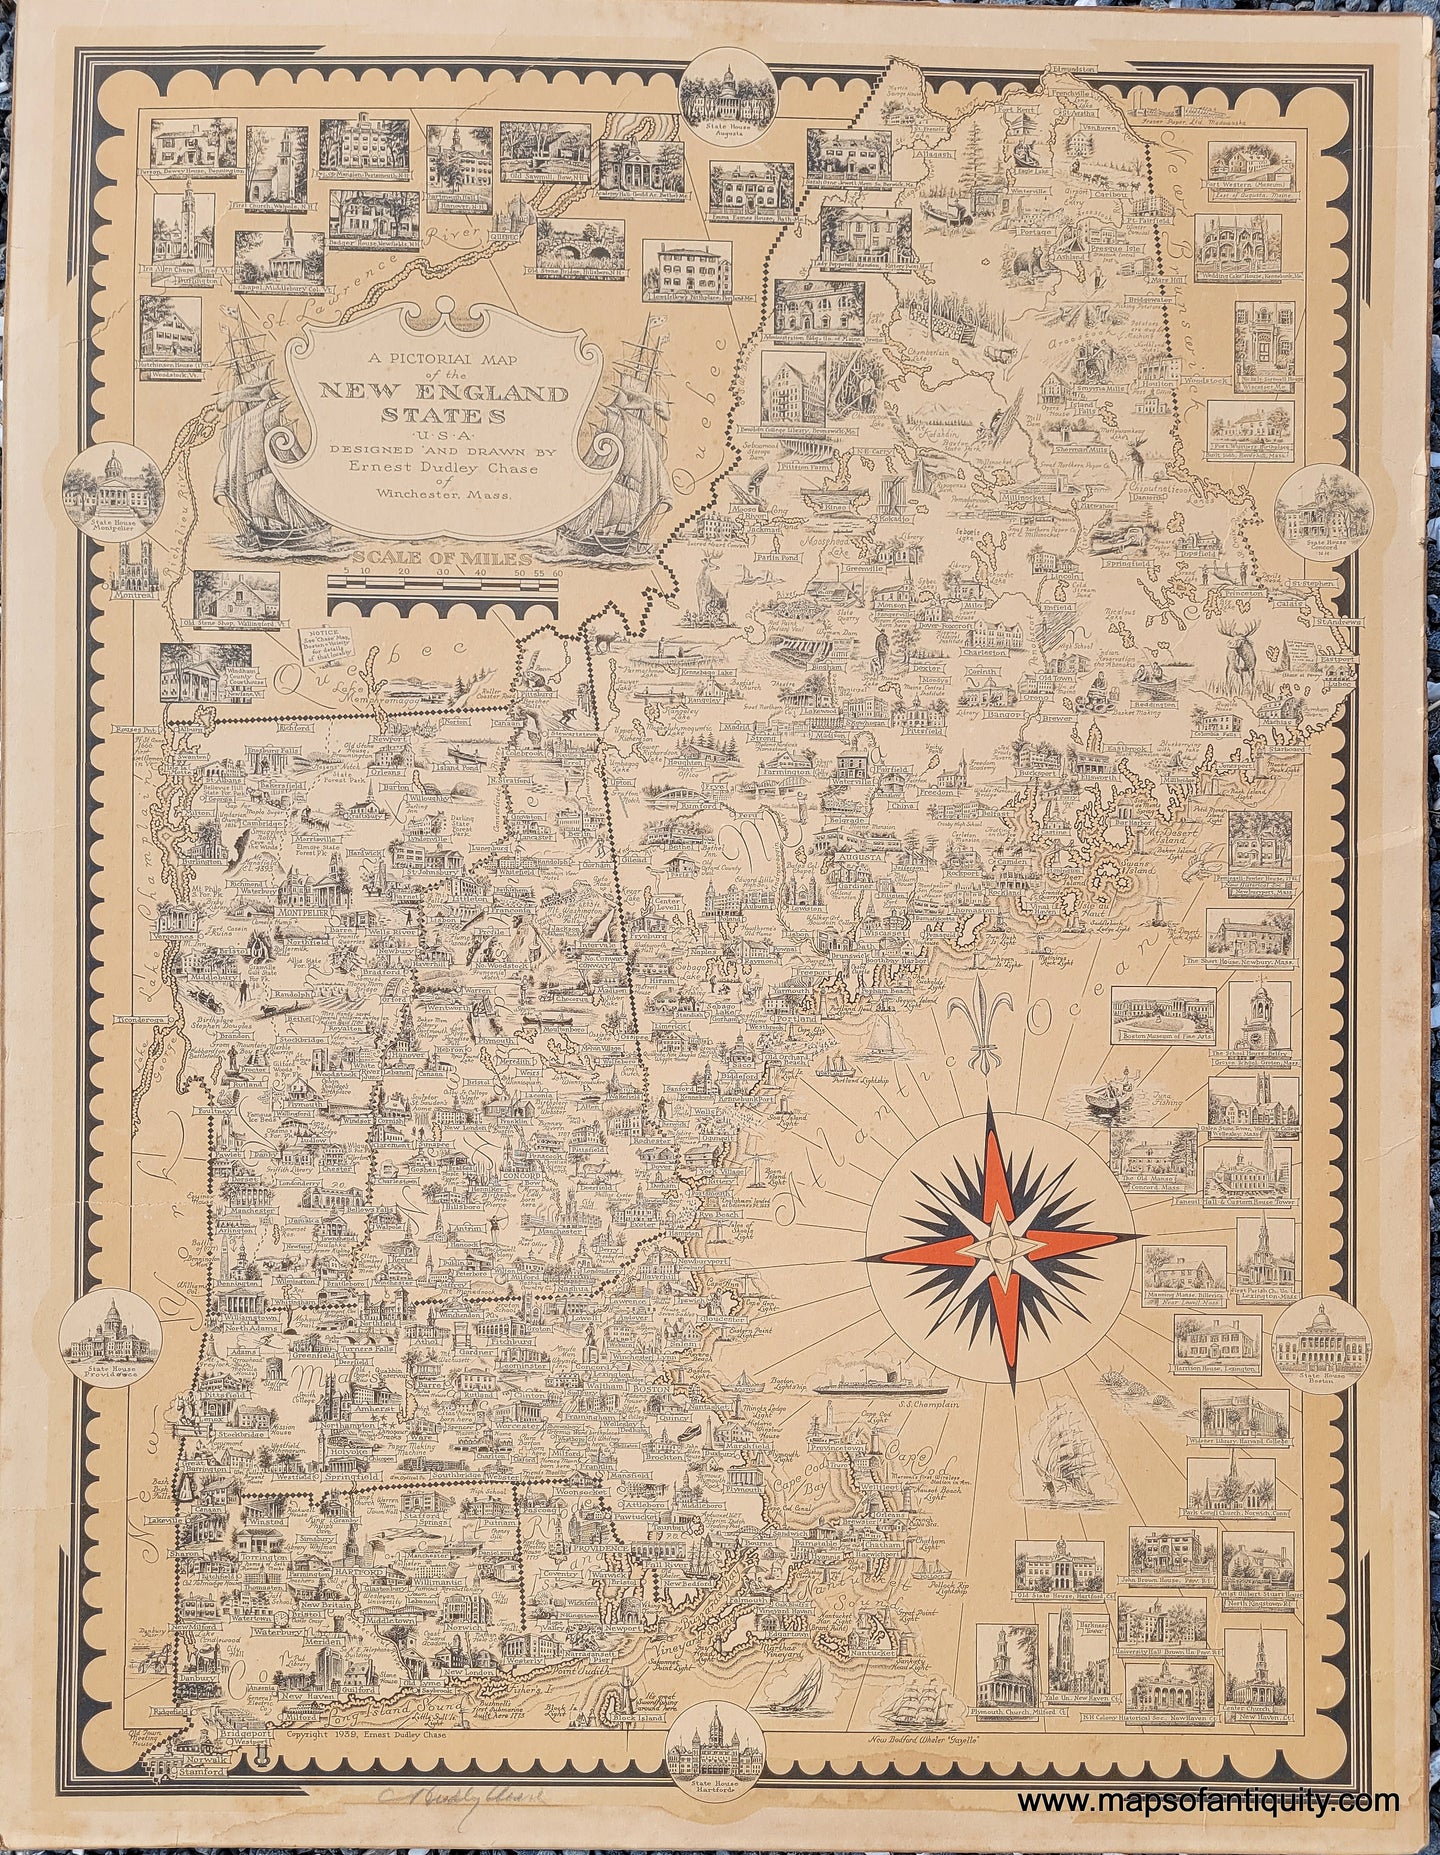 Antique-Pictorial-Map-A-Pictorial-Map-of-the-New-England-States-U.S.A.-Designed-and-Drawn-by-Ernest-Dudley-Chase-of-Winchester-Mass.-1939-Ernest-Dudley-Chase-New-England-1900s-20th-century-Maps-of-Antiquity